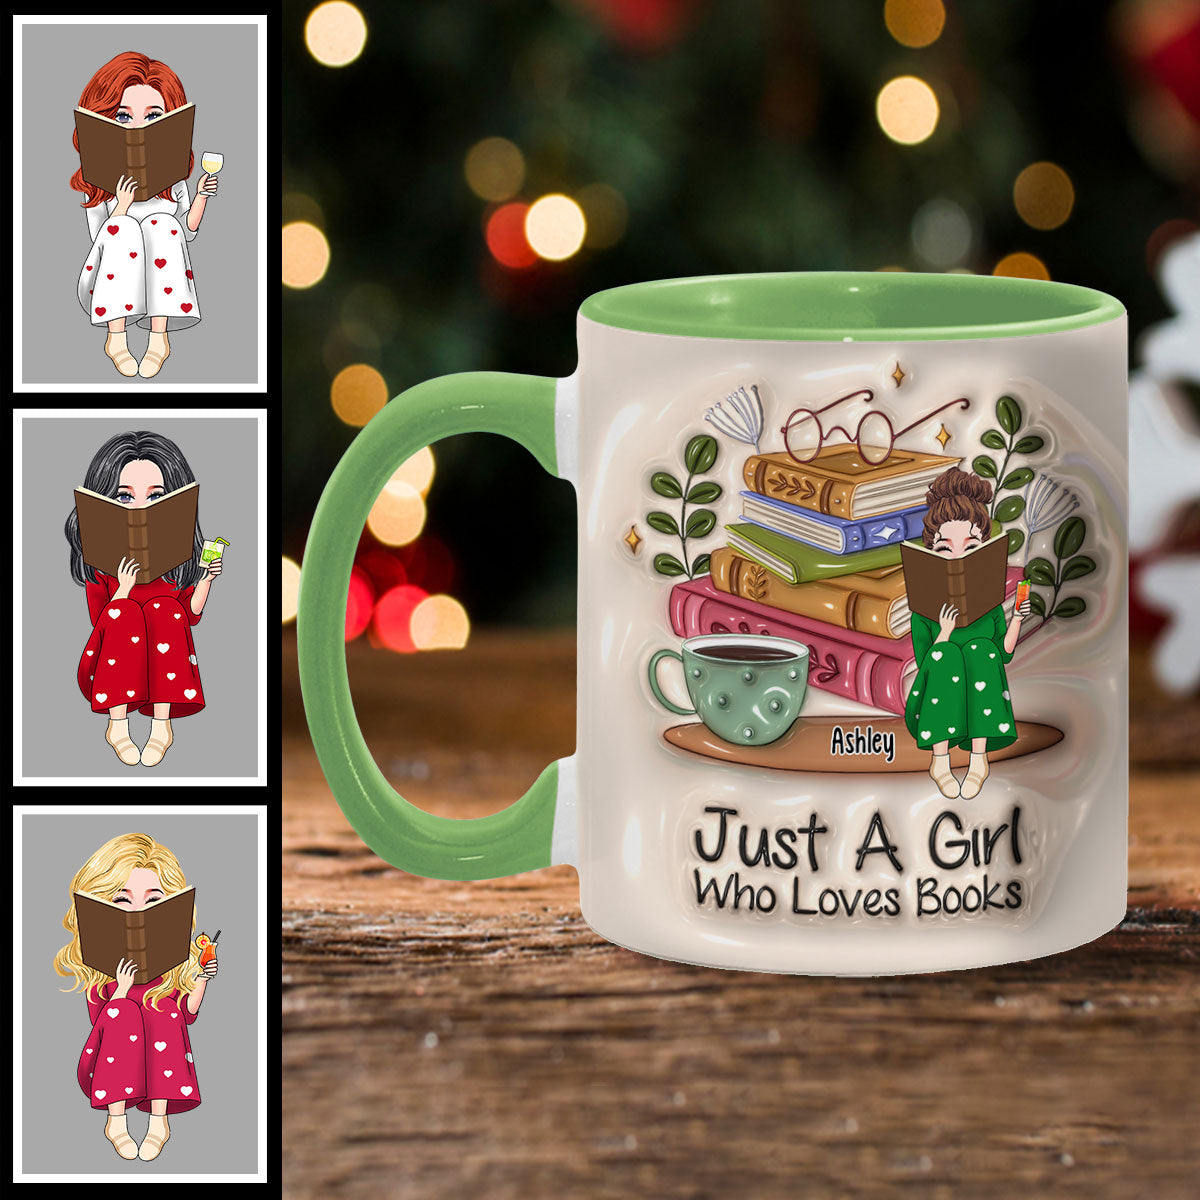 Discover Just A Girl Who Loves Books - Personalized Book Accent Mug